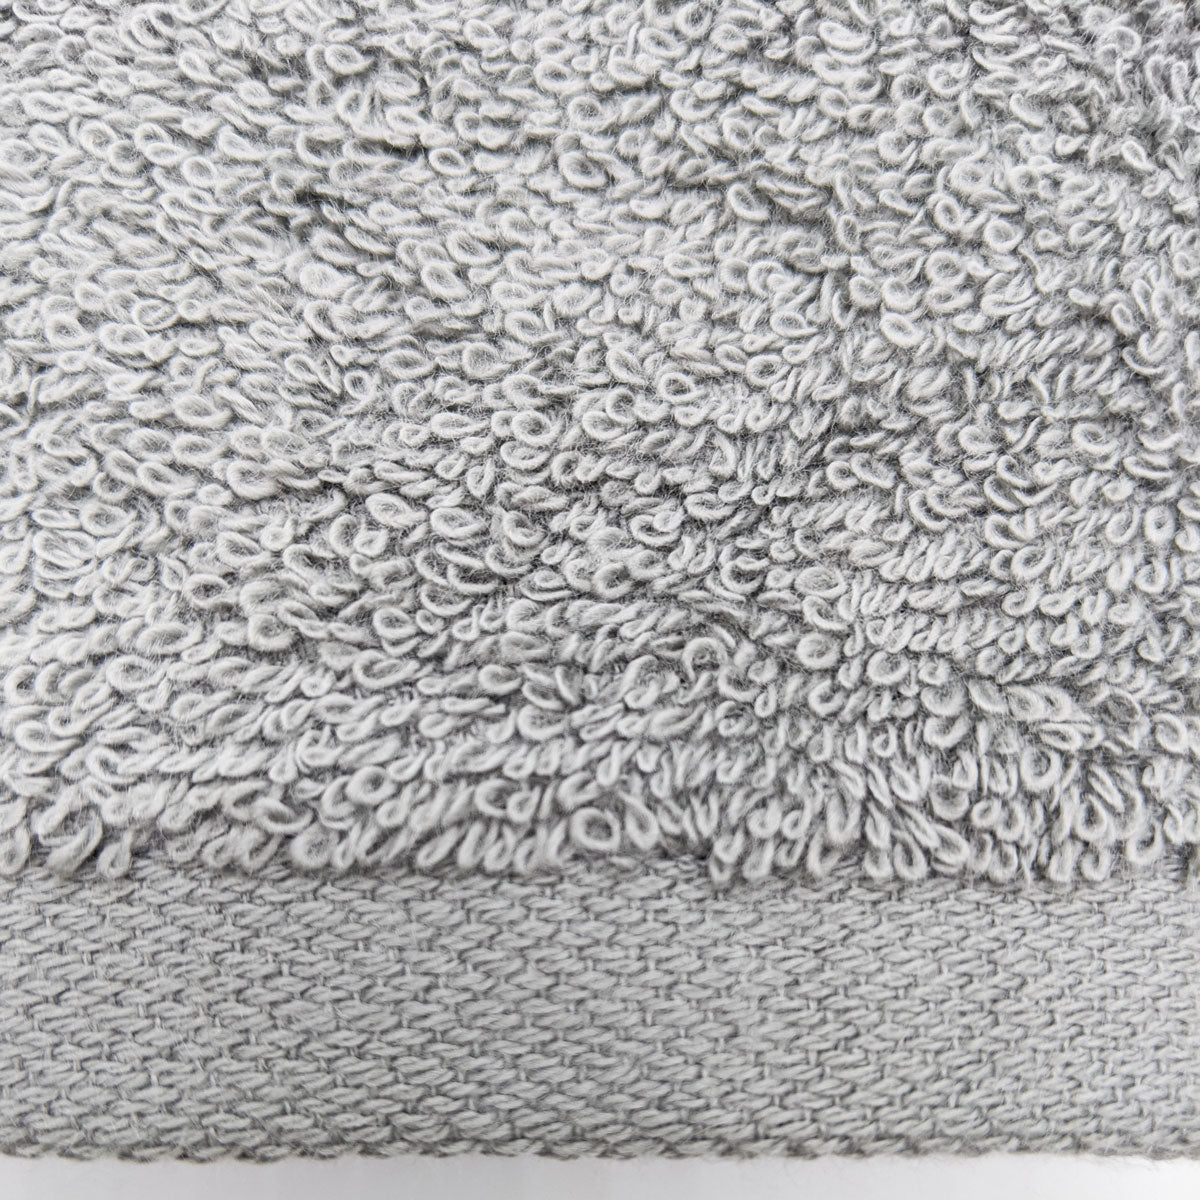 Cotton Washcloth - Grey by Hyssop Beauty Apothecary L.L.C.